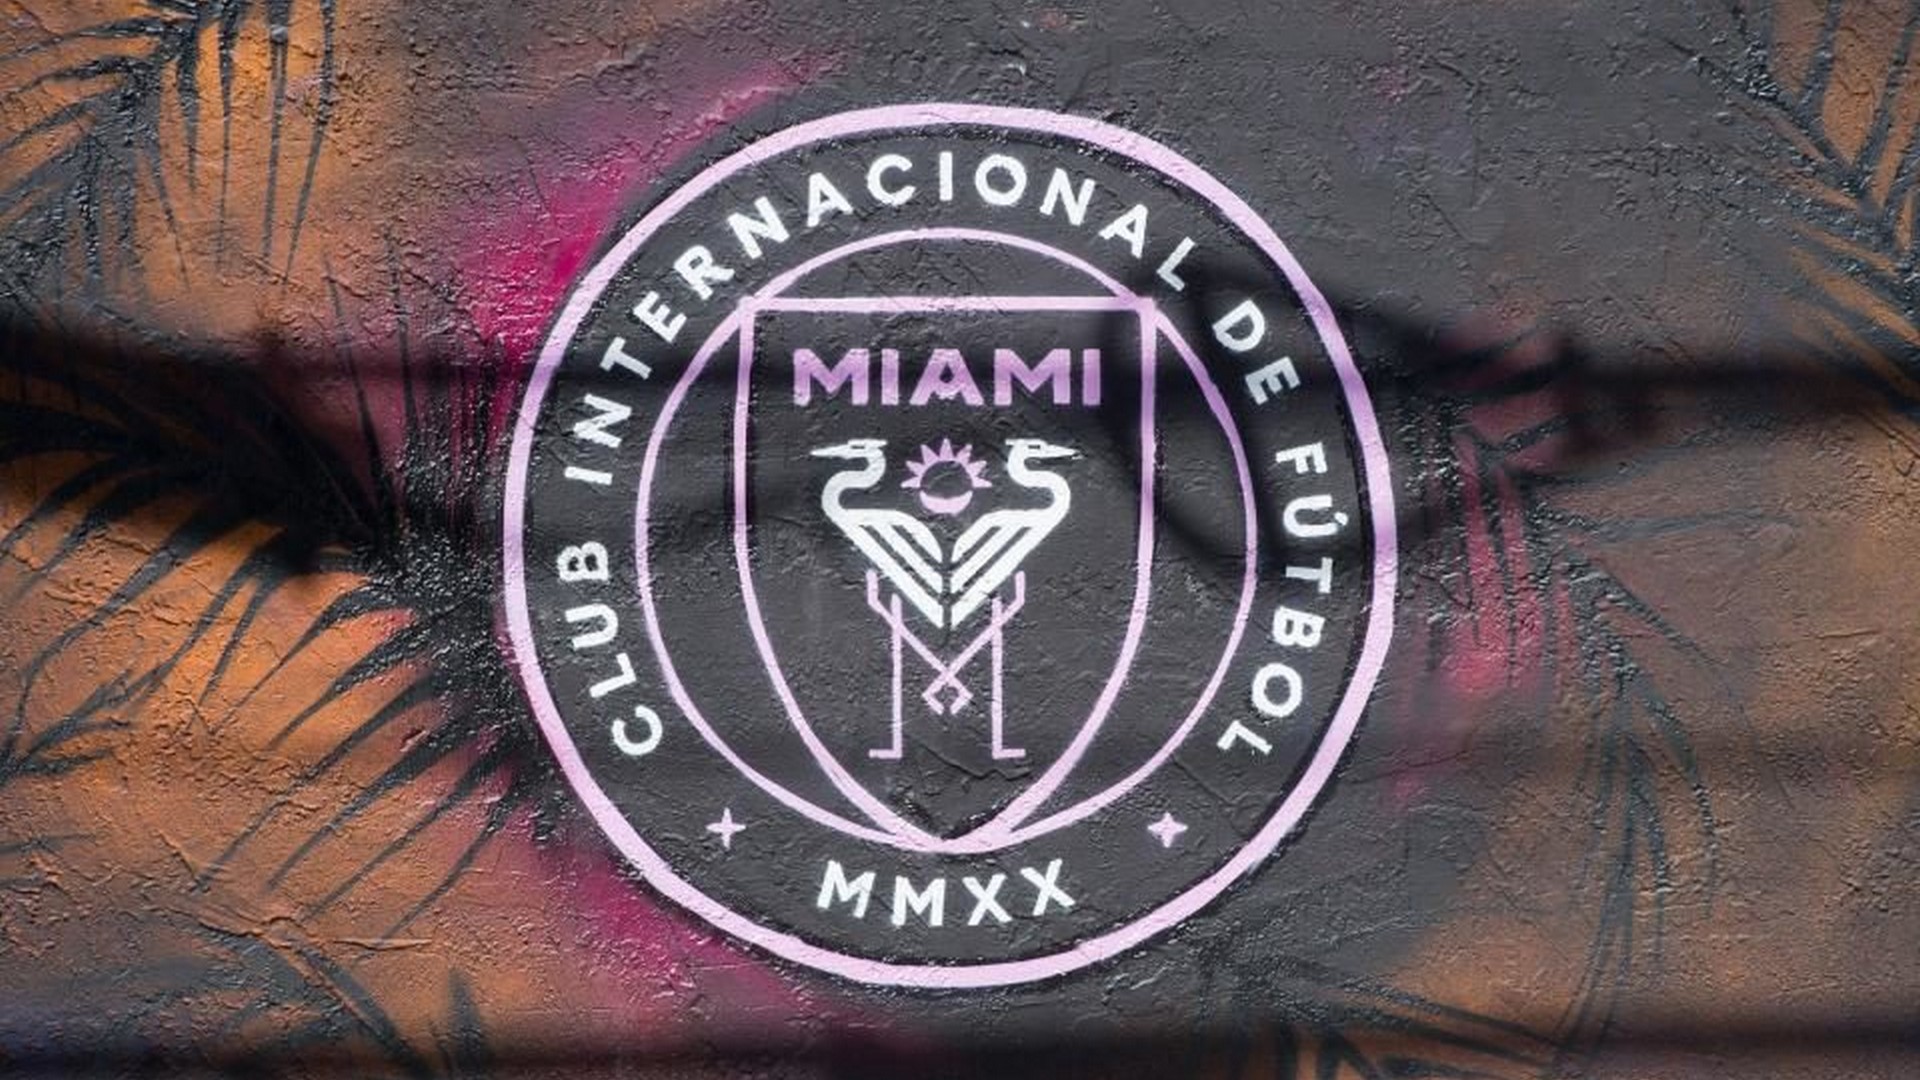 HD Desktop Wallpaper Inter Miami with high-resolution 1920x1080 pixel. You can use this wallpaper for your Desktop Computers, Mac Screensavers, Windows Backgrounds, iPhone Wallpapers, Tablet or Android Lock screen and another Mobile device